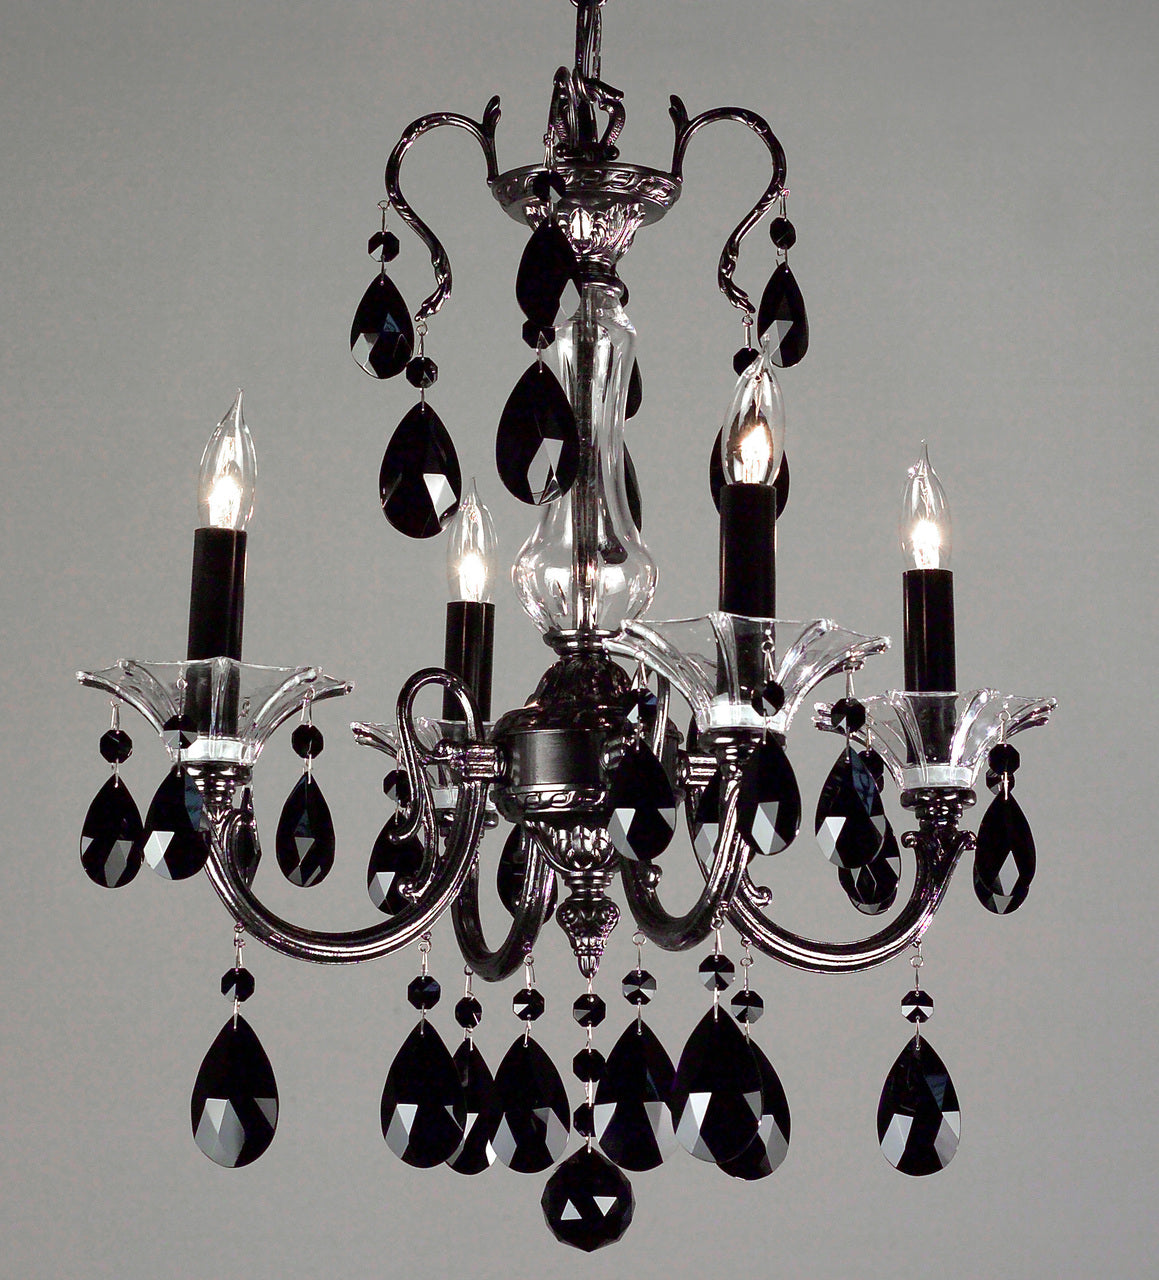 Classic Lighting 57054 EP CBK Via Lombardi Crystal Mini Chandelier in Ebony Pearl (Imported from Spain)